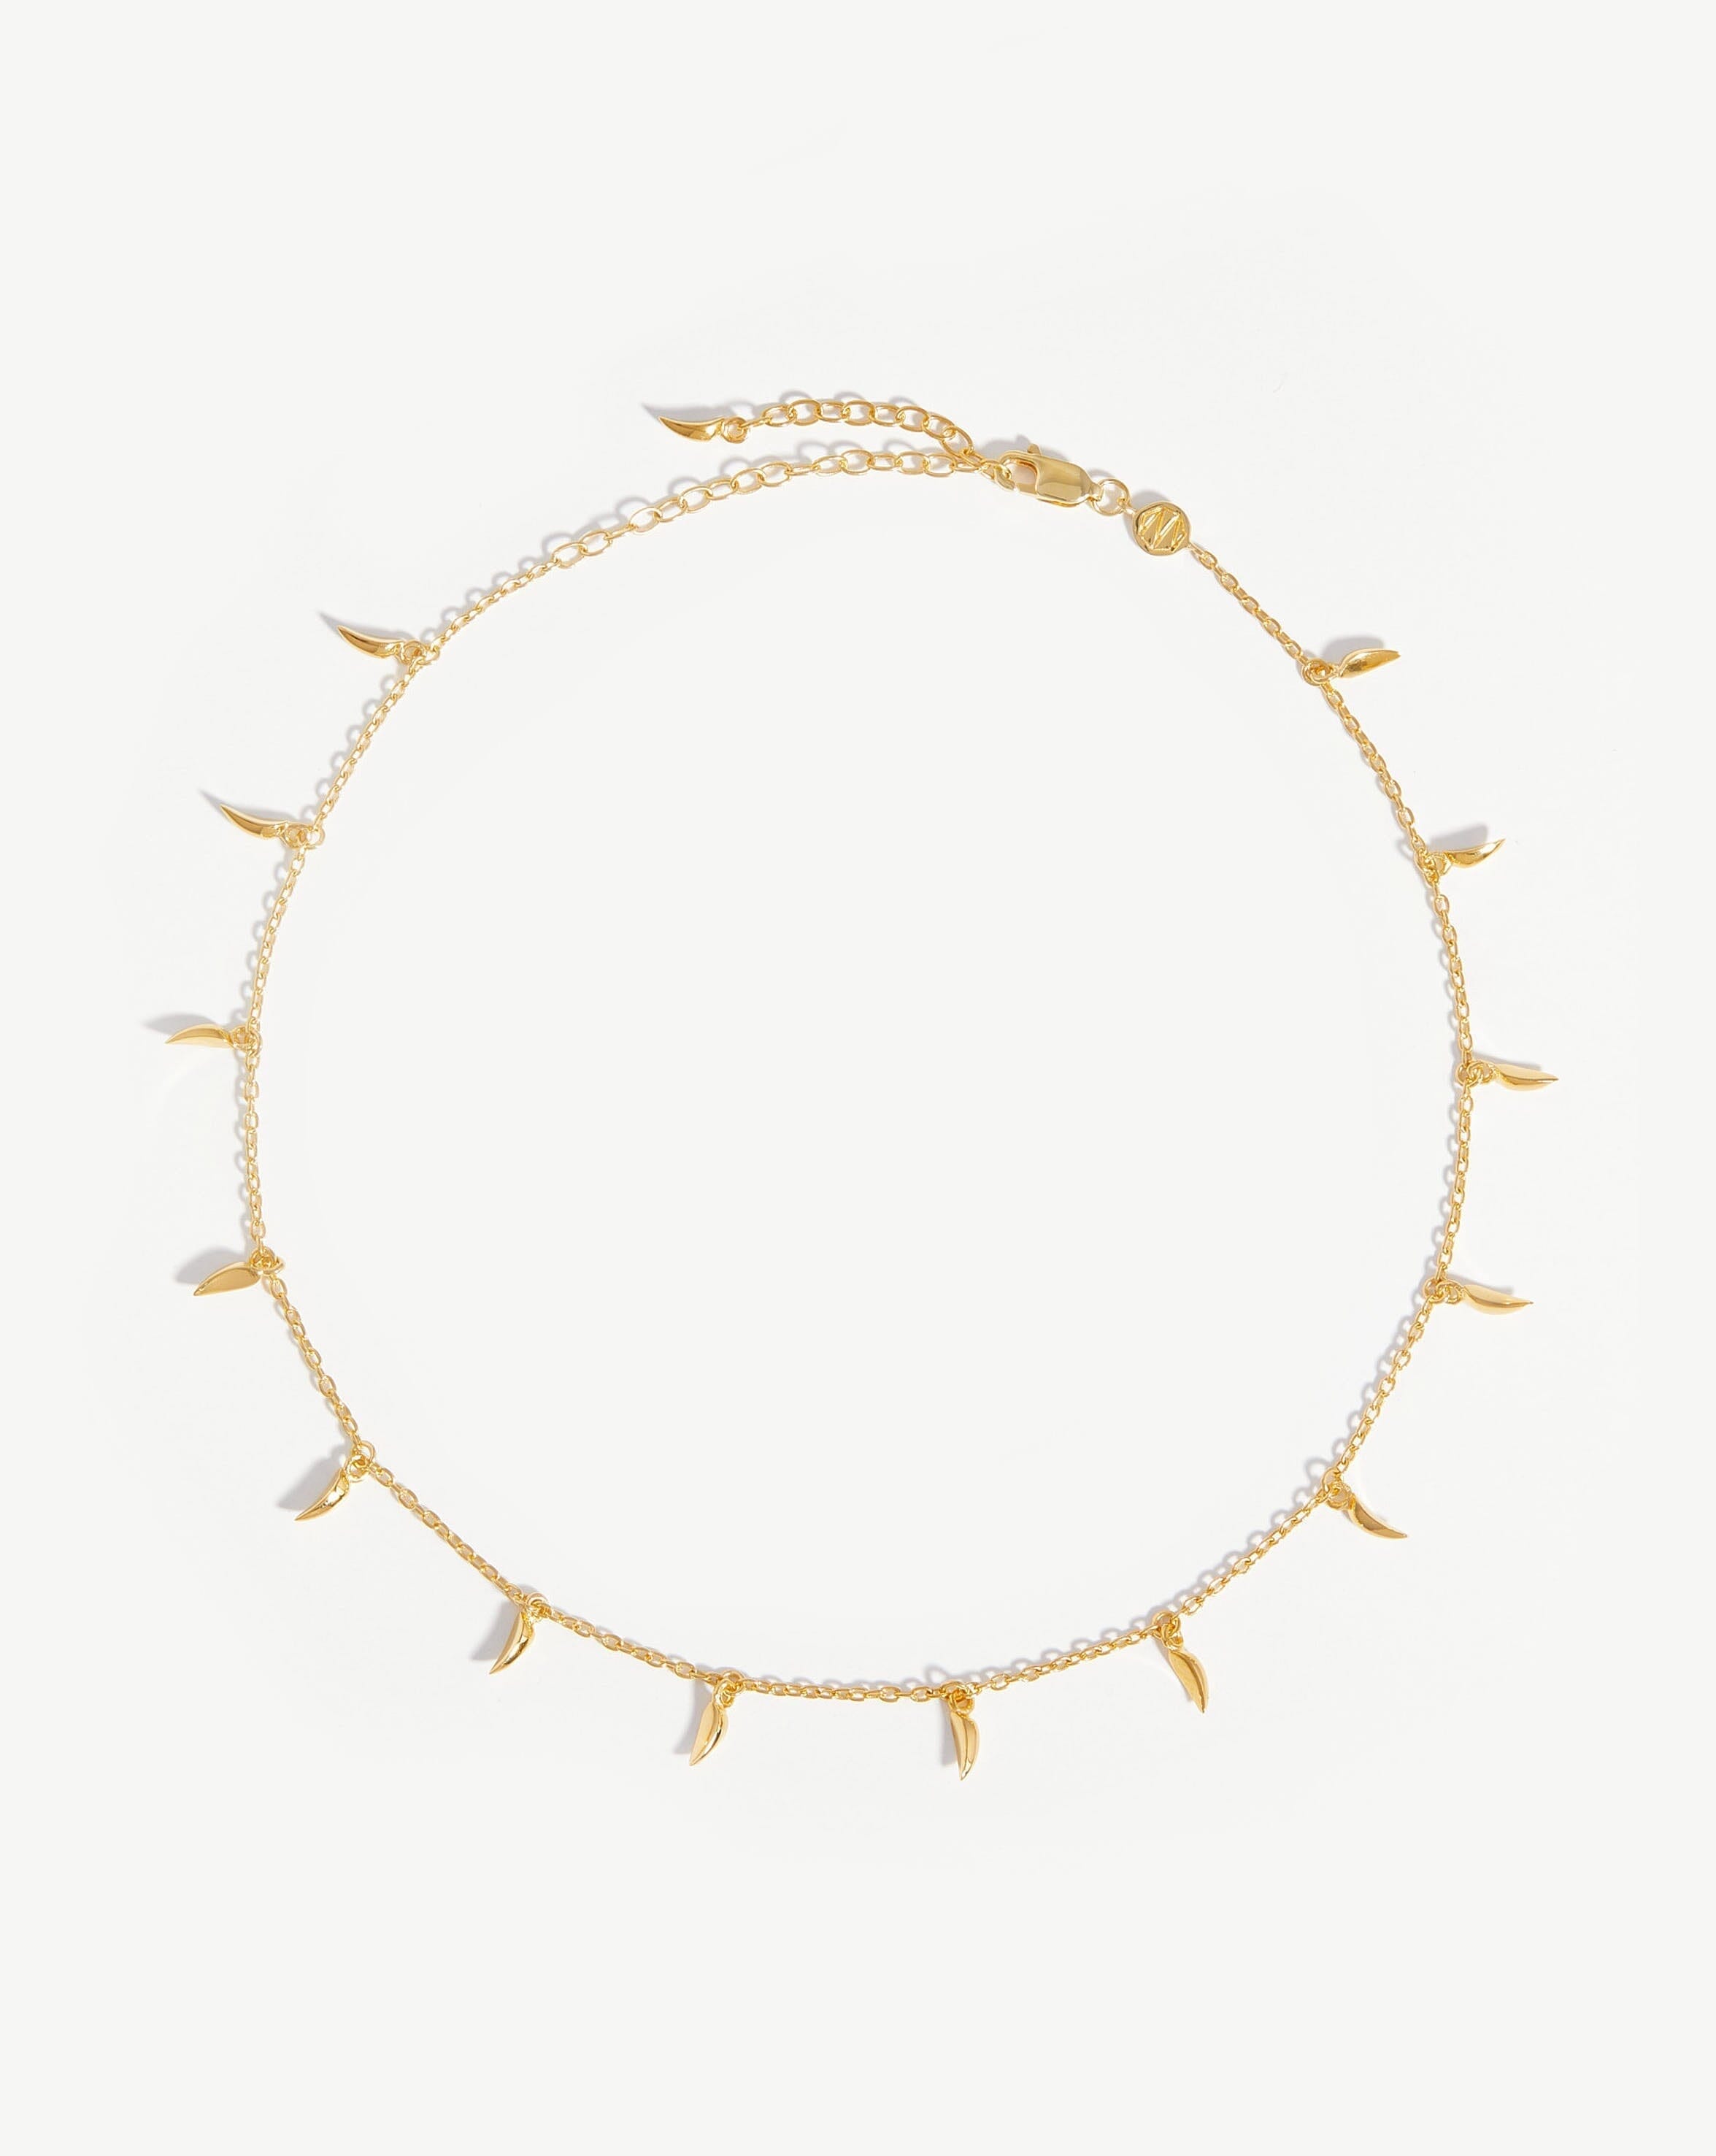 Lucy Williams Mini Fang Choker Necklaces Missoma 